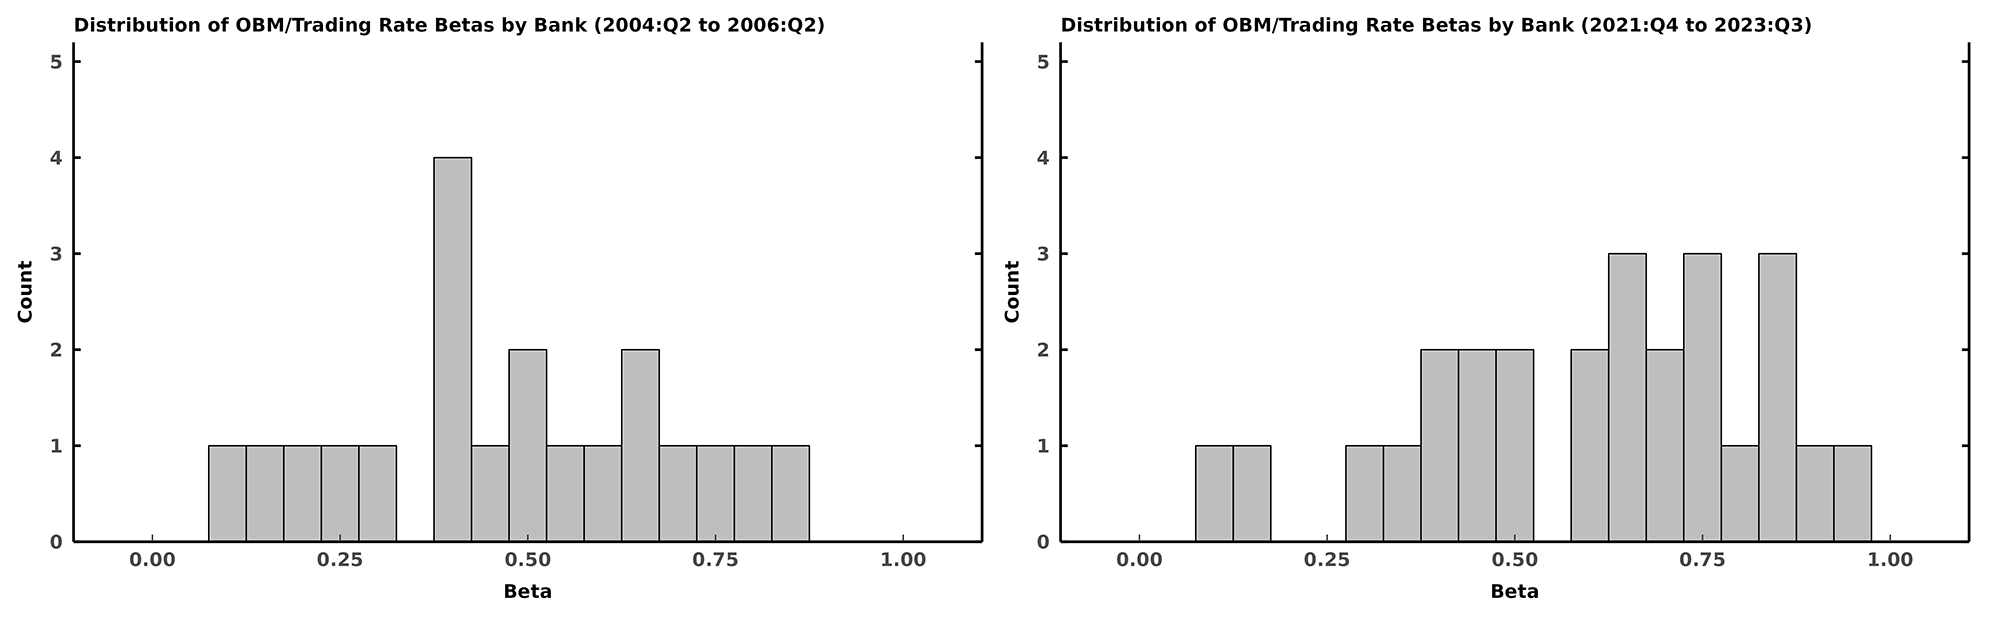 Figure 8. Histograms of OBM/Trading Rate Betas for Two Interest Rate Environments. See accessible link for data.